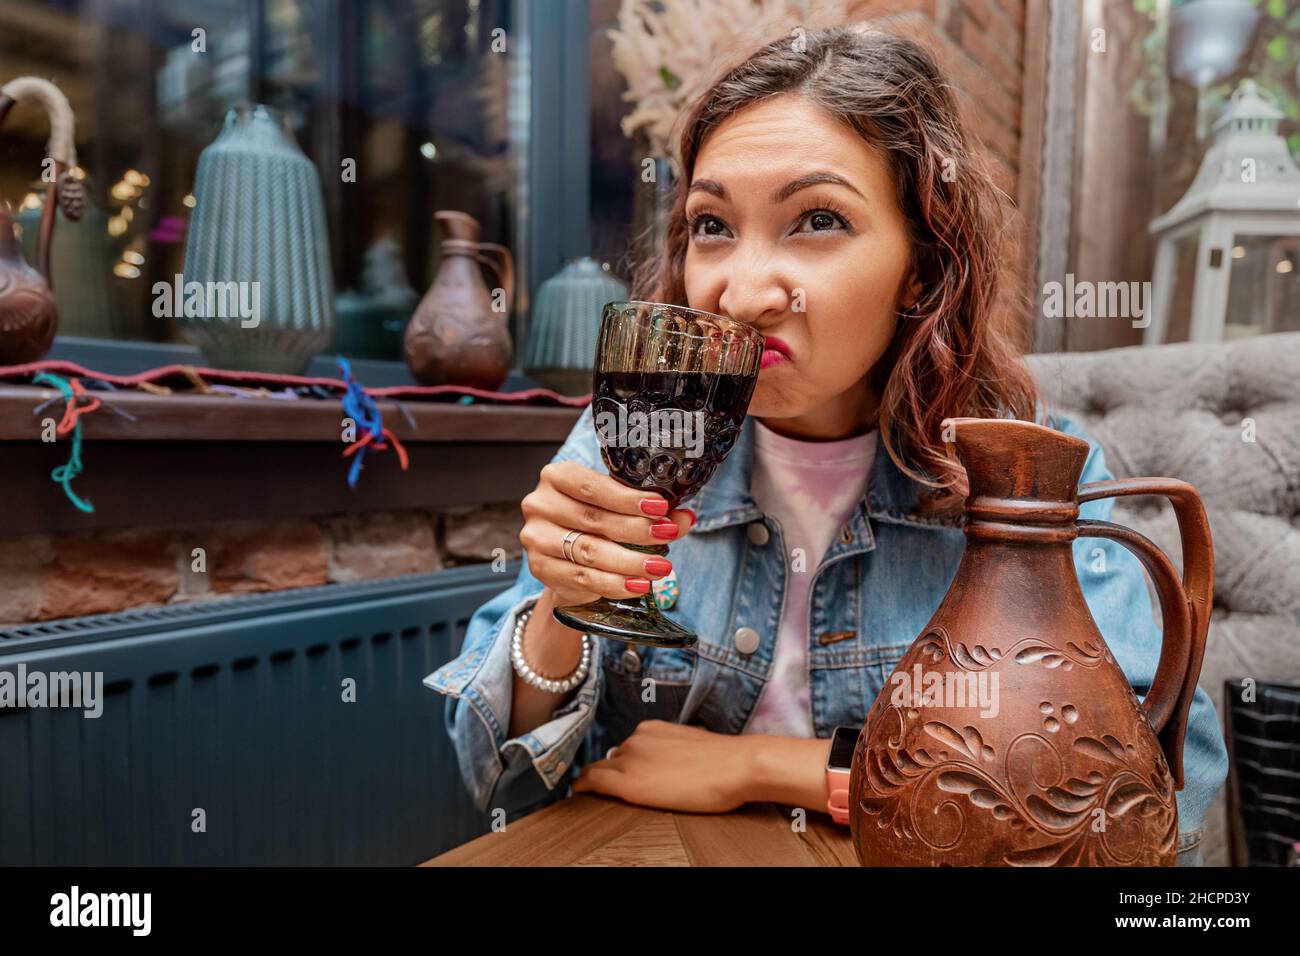 A woman sniffs wine from a glass in a restaurant. Concept sommelier and rancid spoiled drink Stock Photo